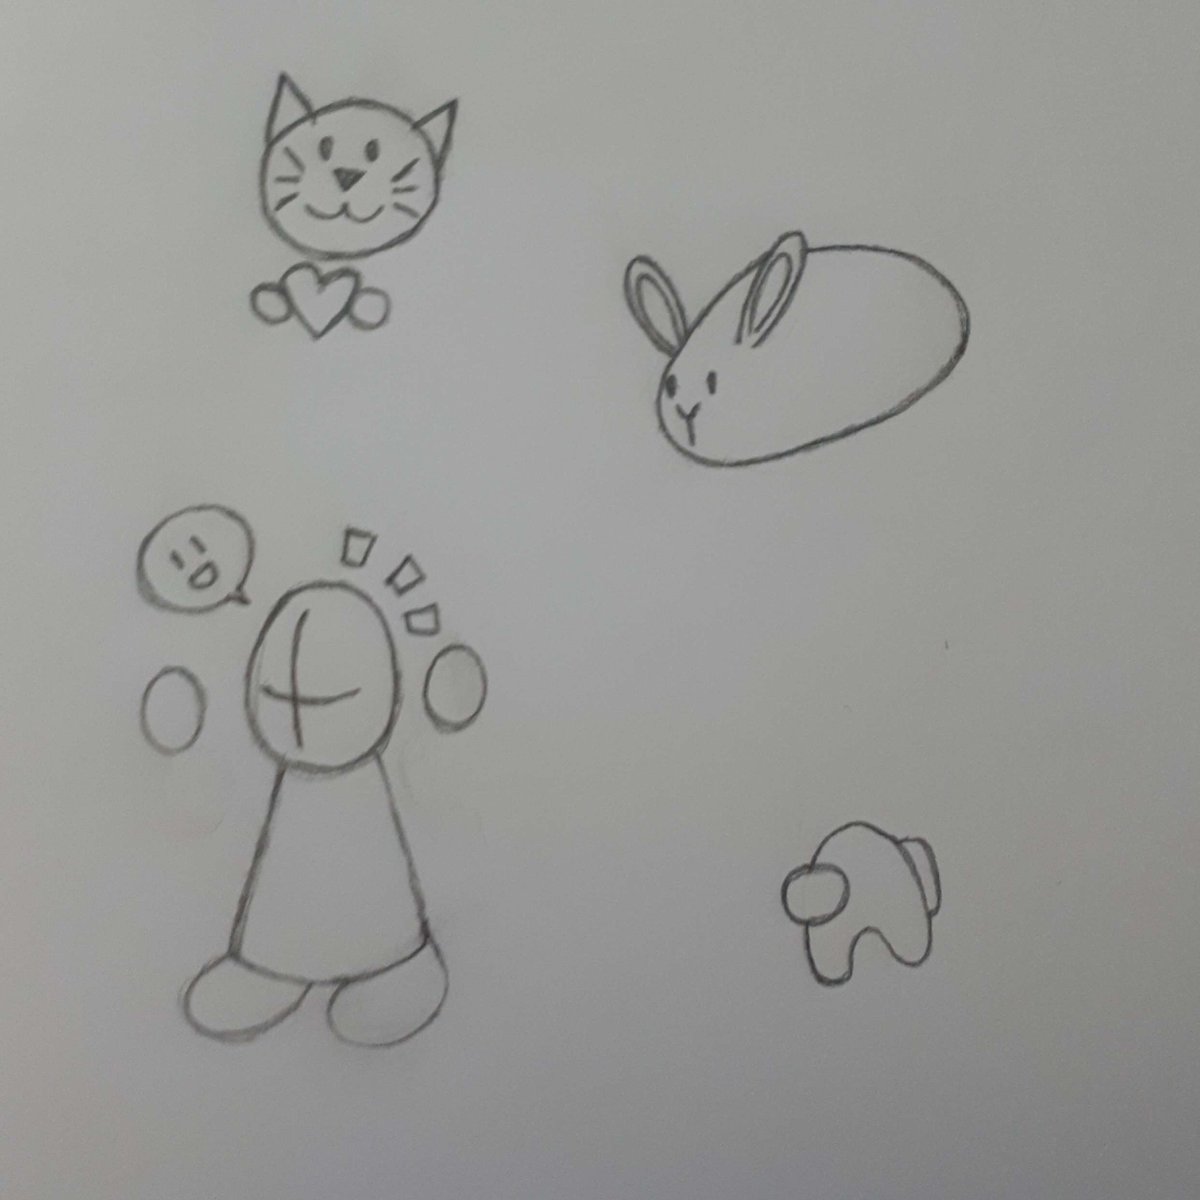 Lil doodles I did during class anyway